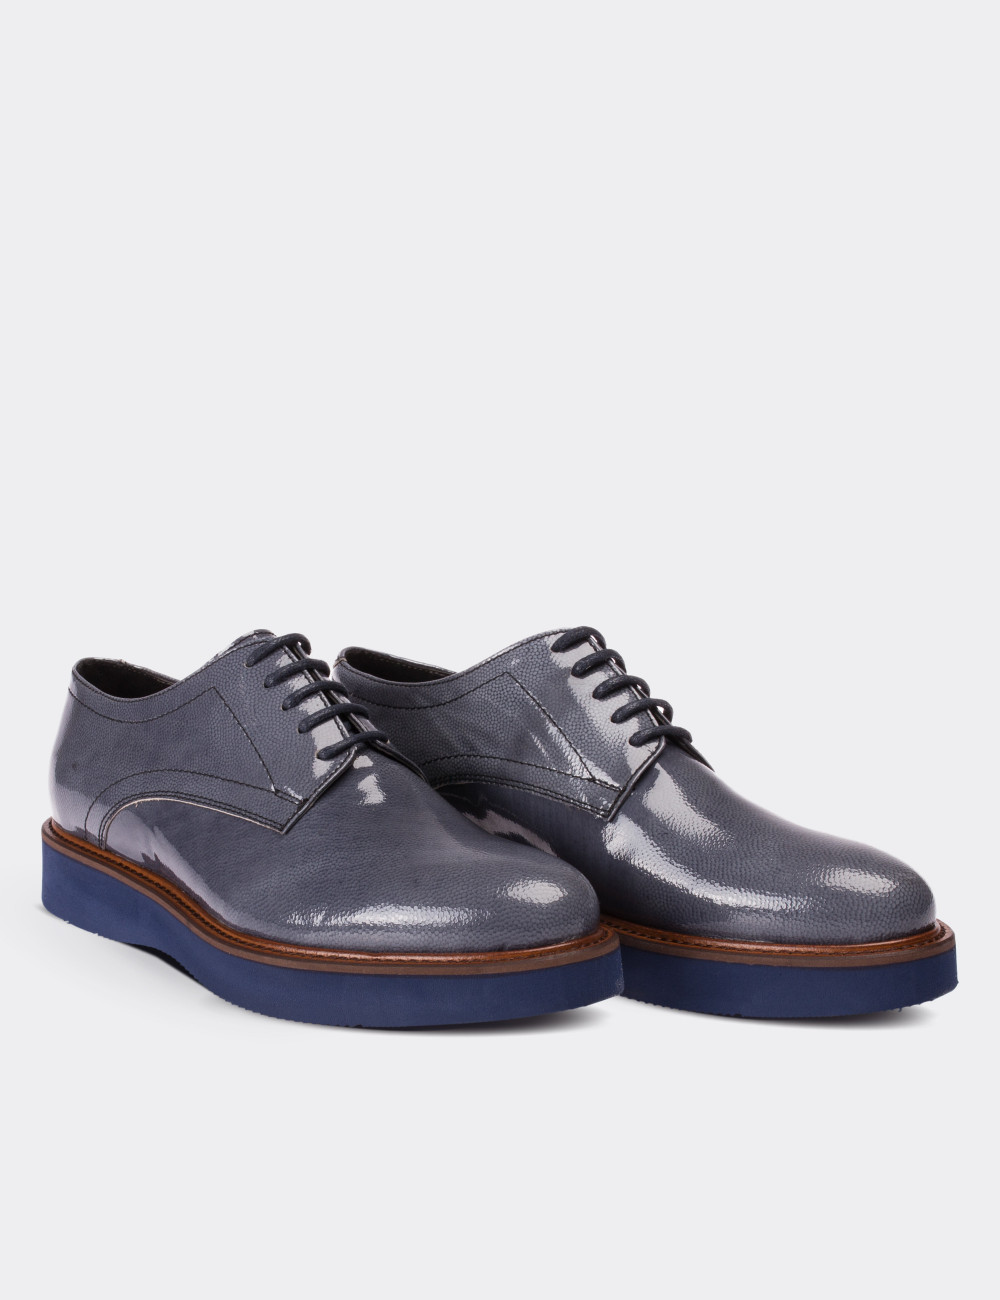 Gray Patent Leather Lace-up Shoes - 01430ZGRIE01